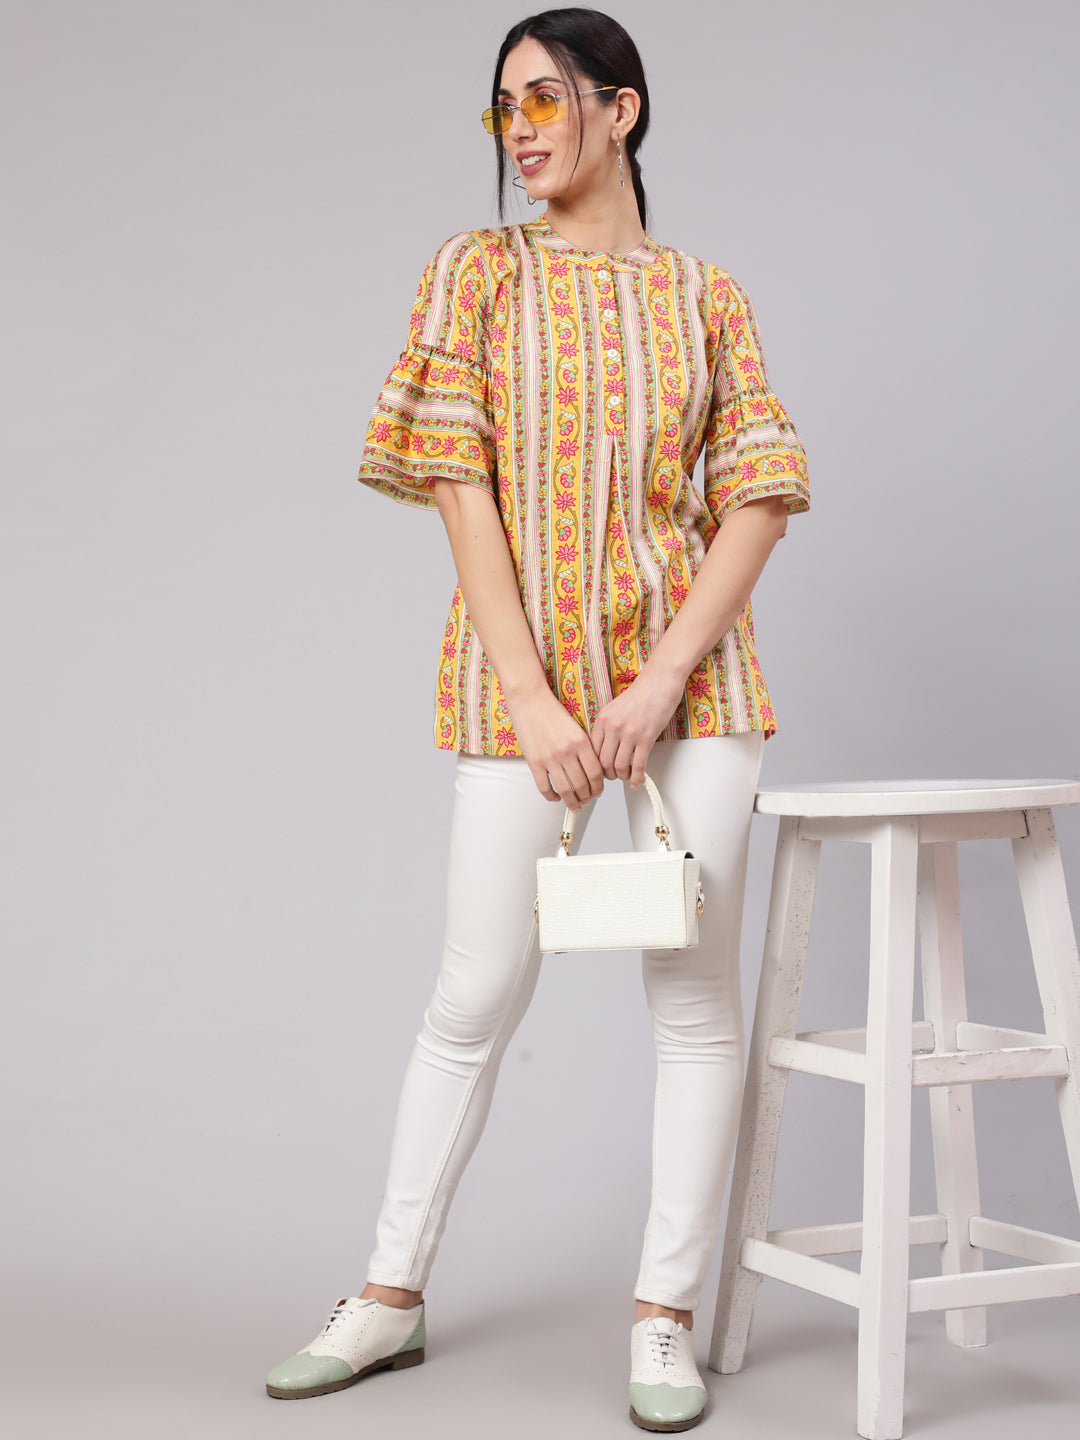 Yellow Floral Print Tunic With Bell Sleeve